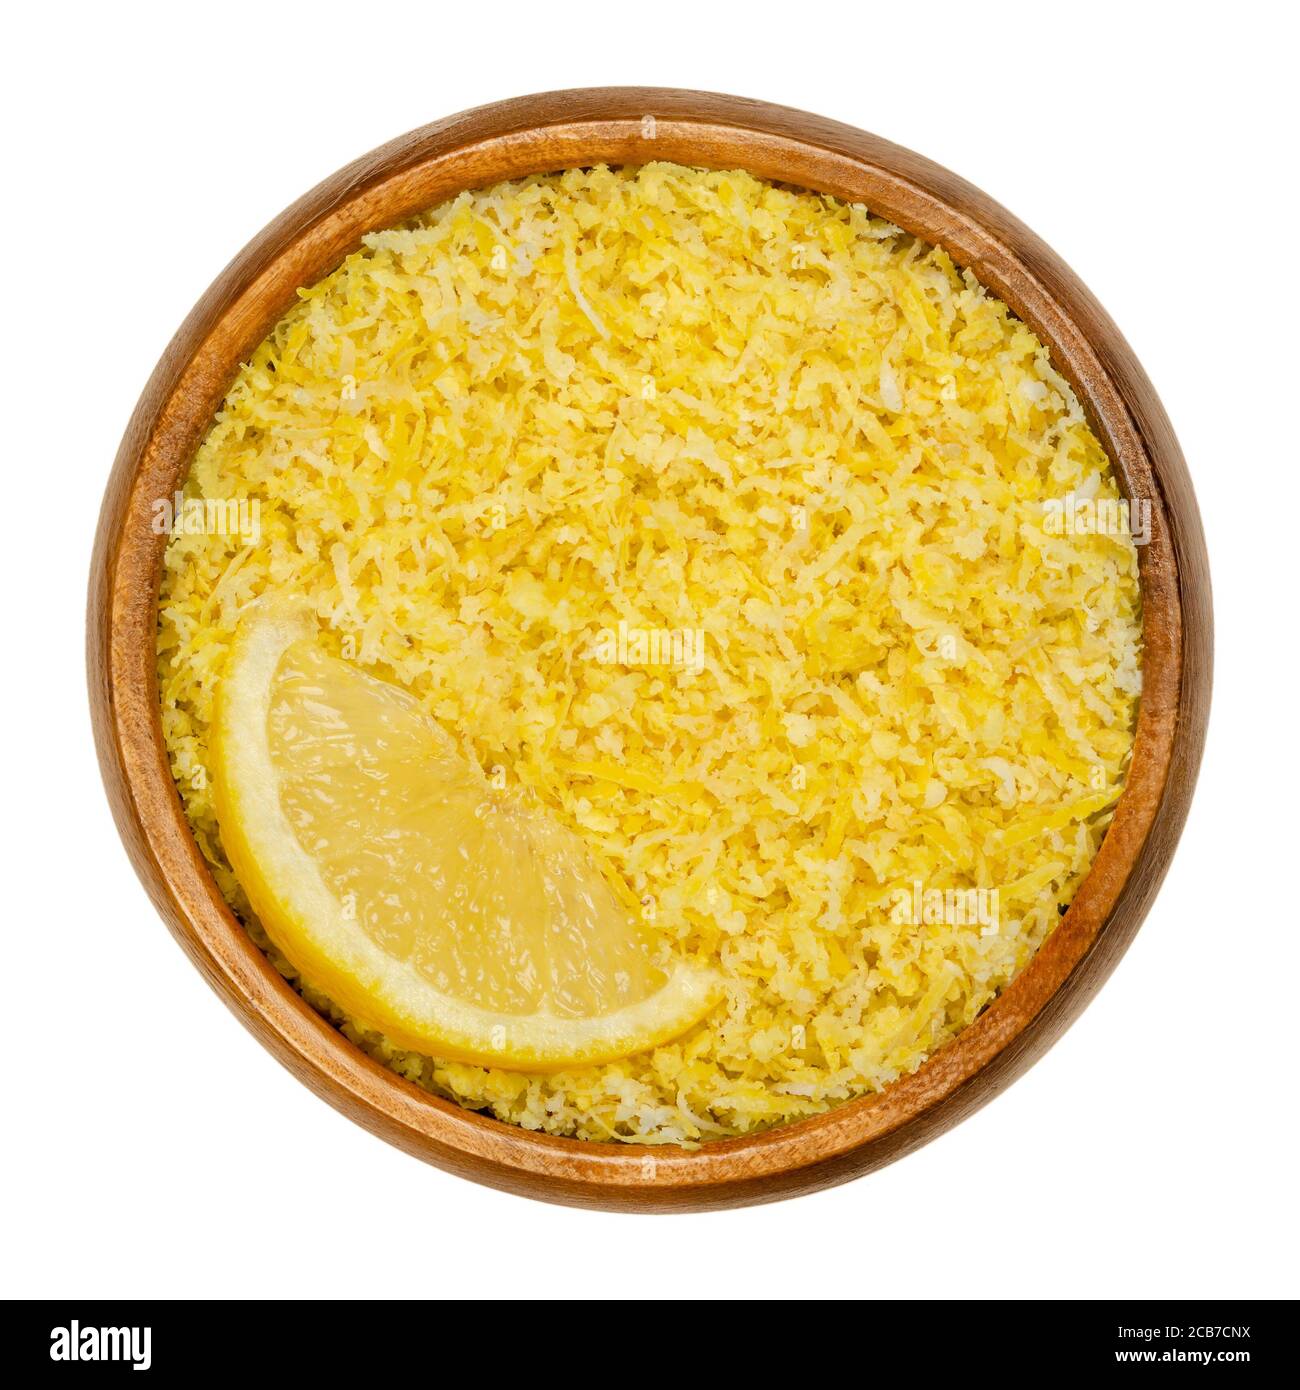 Lemon slice and freshly grated lemon peel in a wooden bowl. Zests of ripe yellow edible citrus fruits. Citrus limon. Used as flavoring for baking. Stock Photo